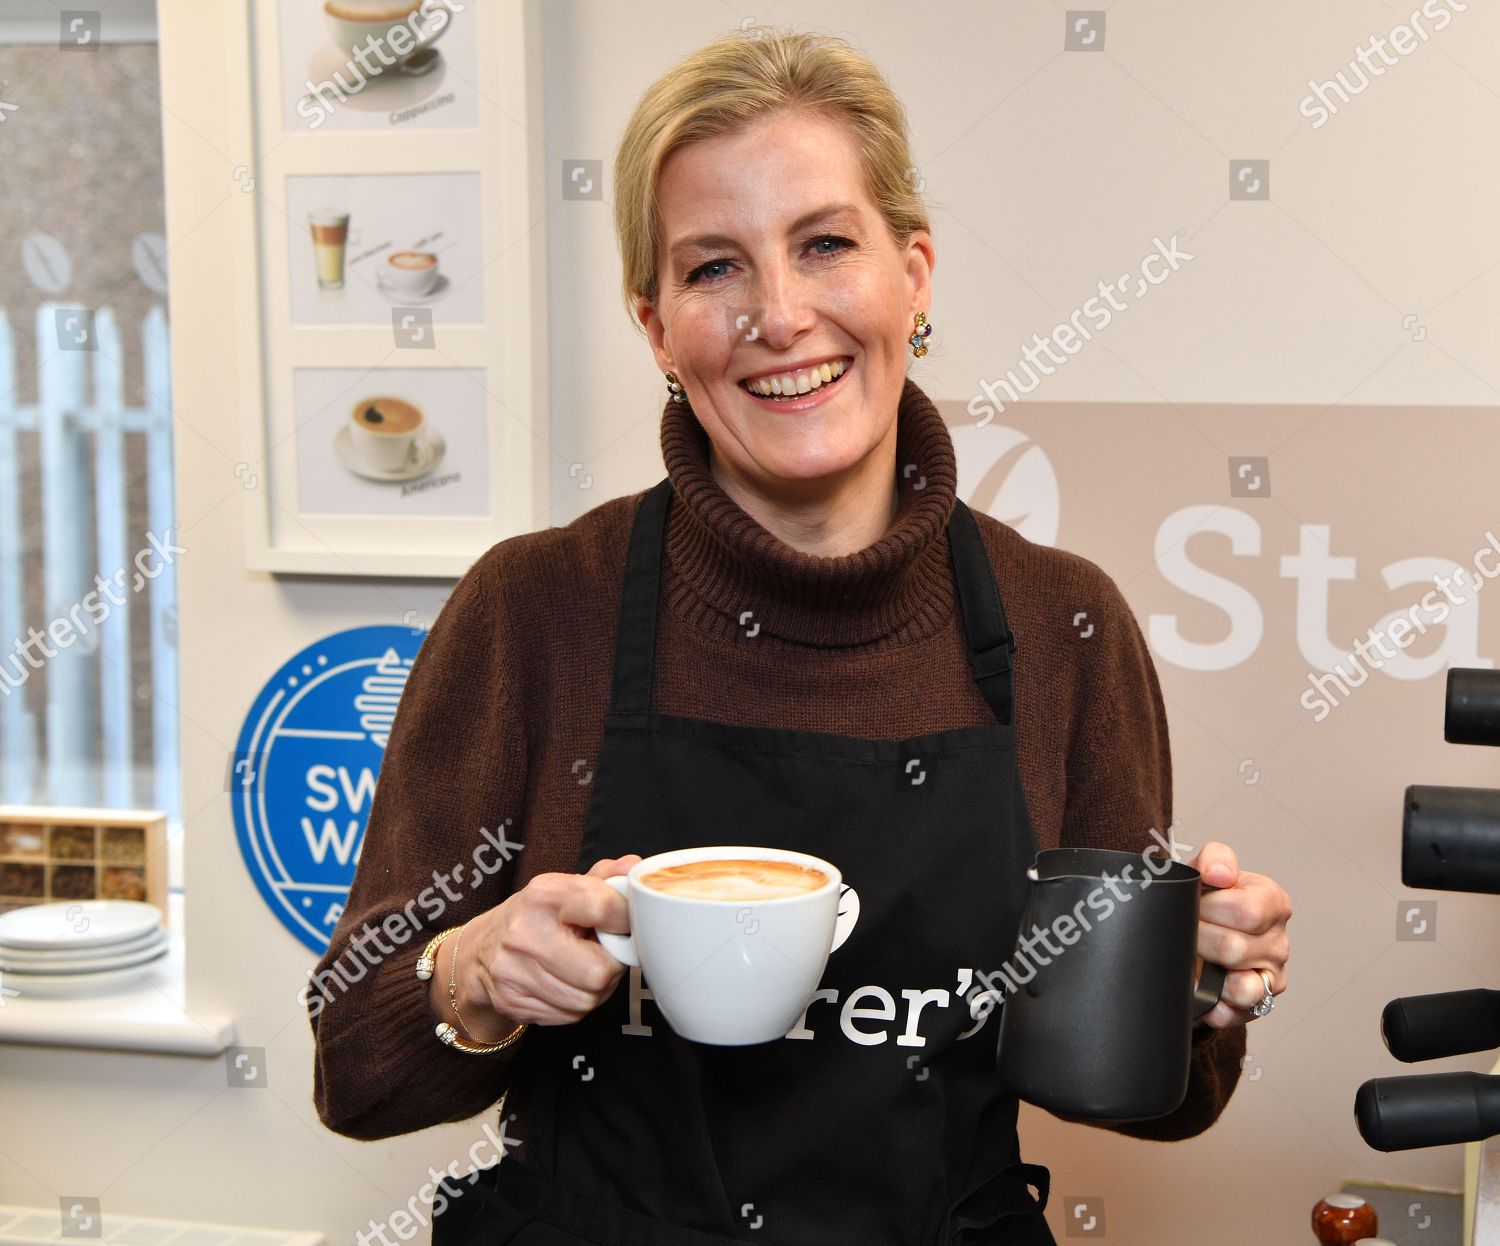 sophie-countess-of-wessex-visit-to-cumbria-shutterstock-editorial-10095439af.jpg